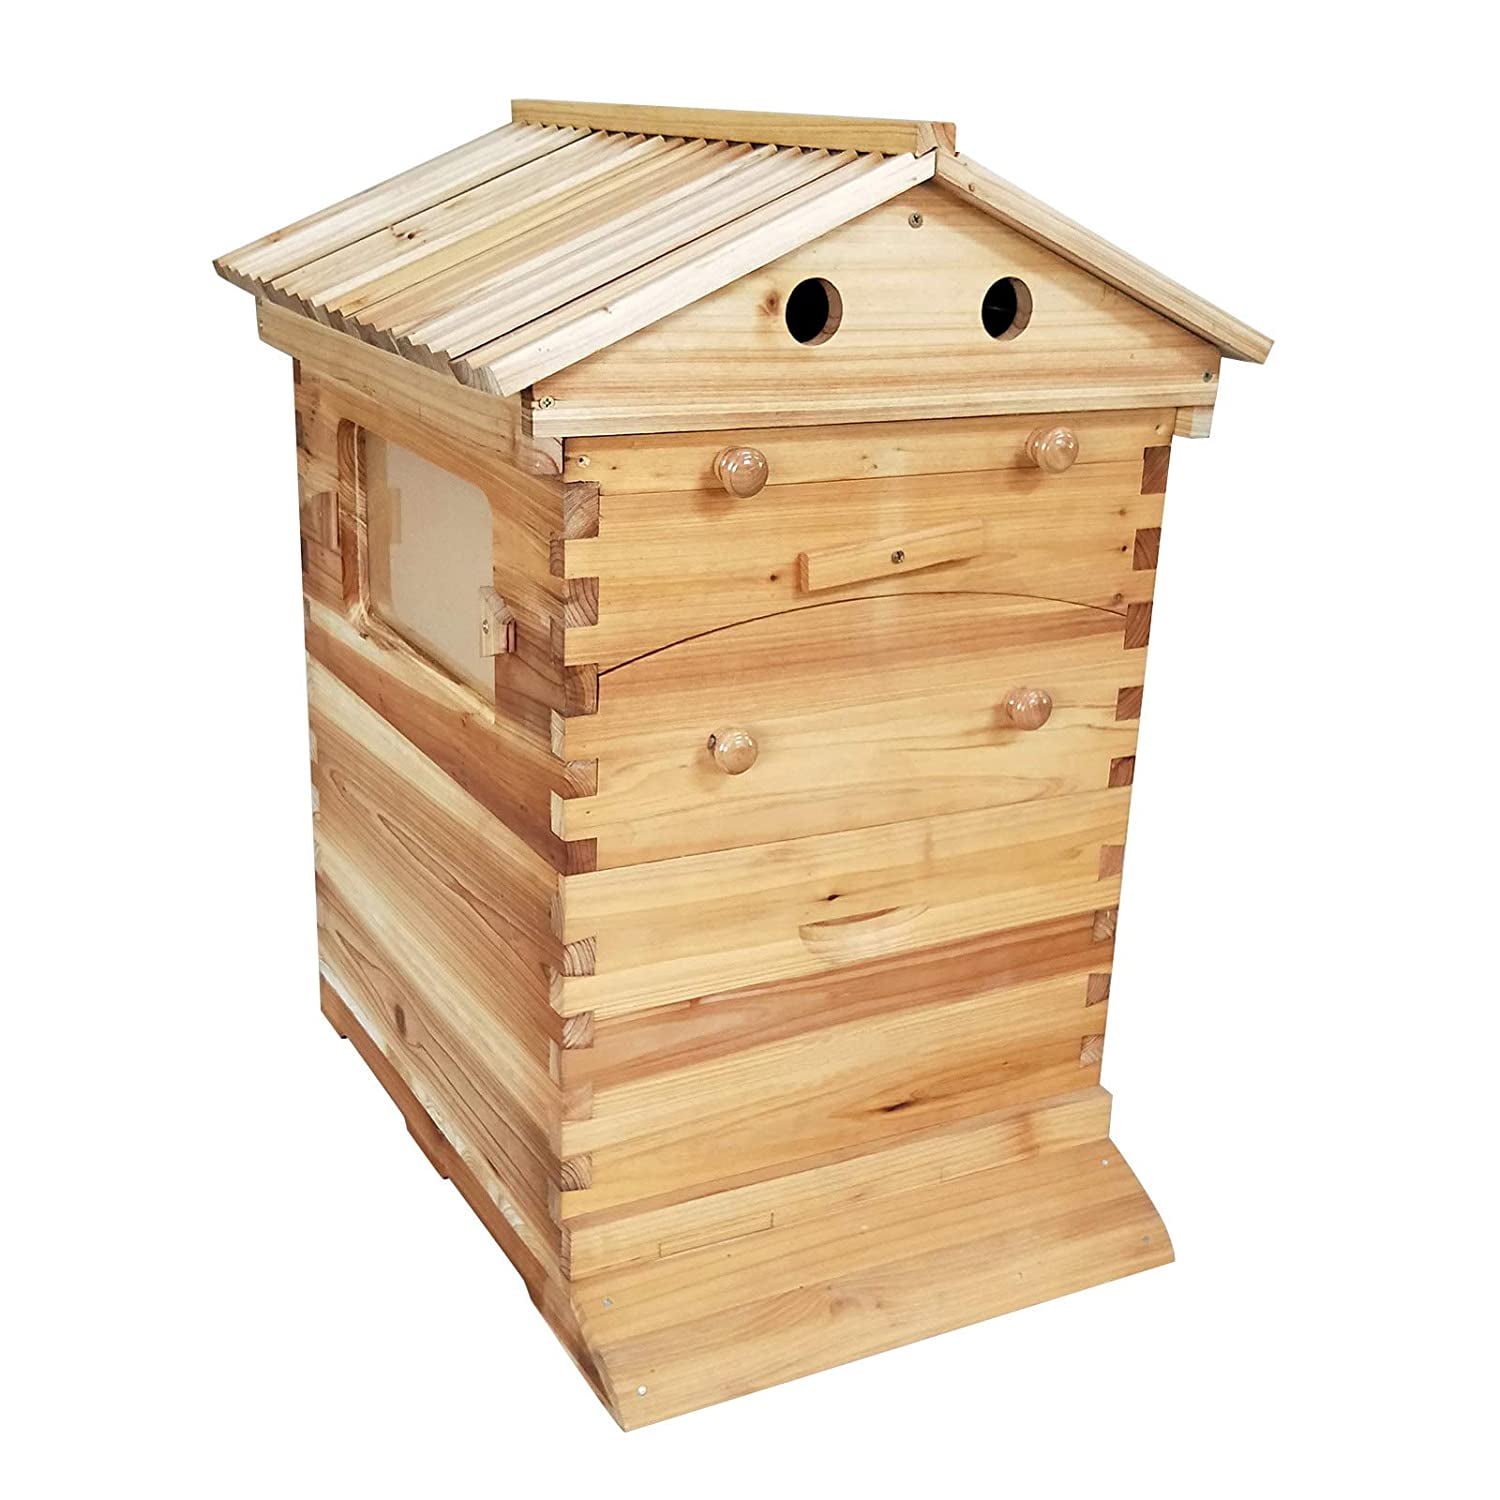 Durable Bee Hive House Beehive Beekeeping Brood Wooden Box for Auto Honey Frames 